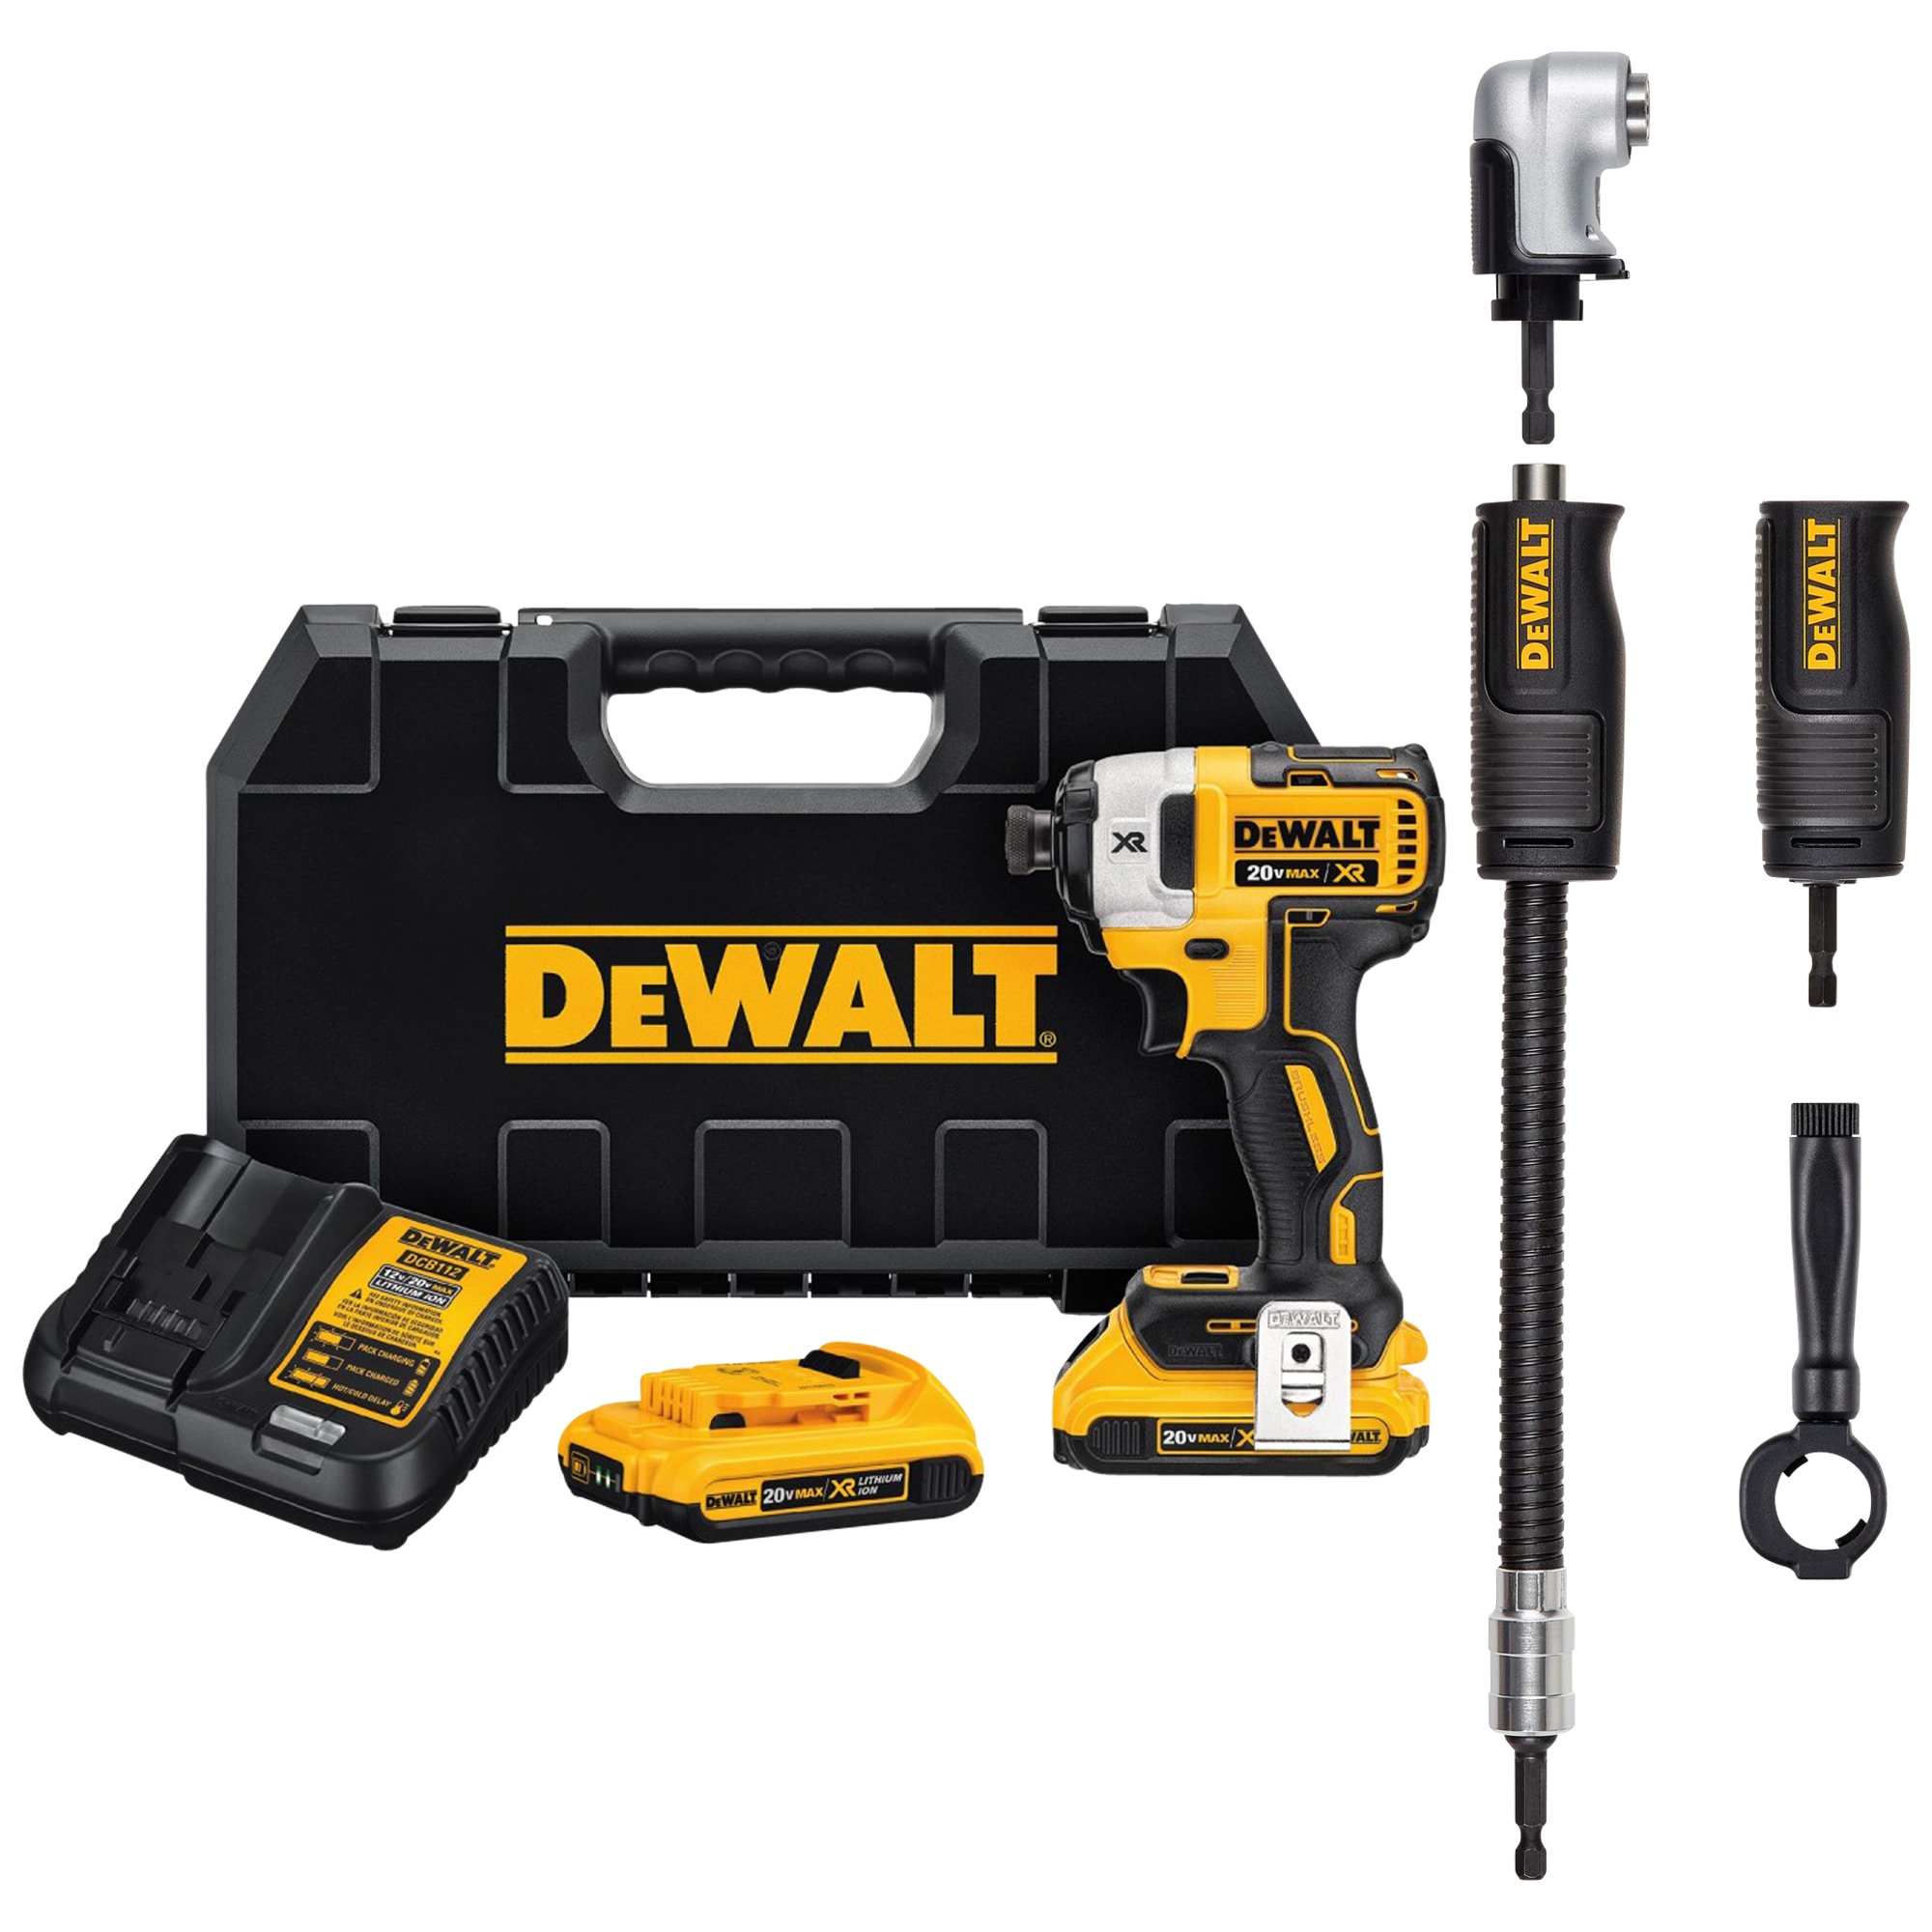 Shop DEWALT Impact Ready Right Angle Drill Attachment & Brushless